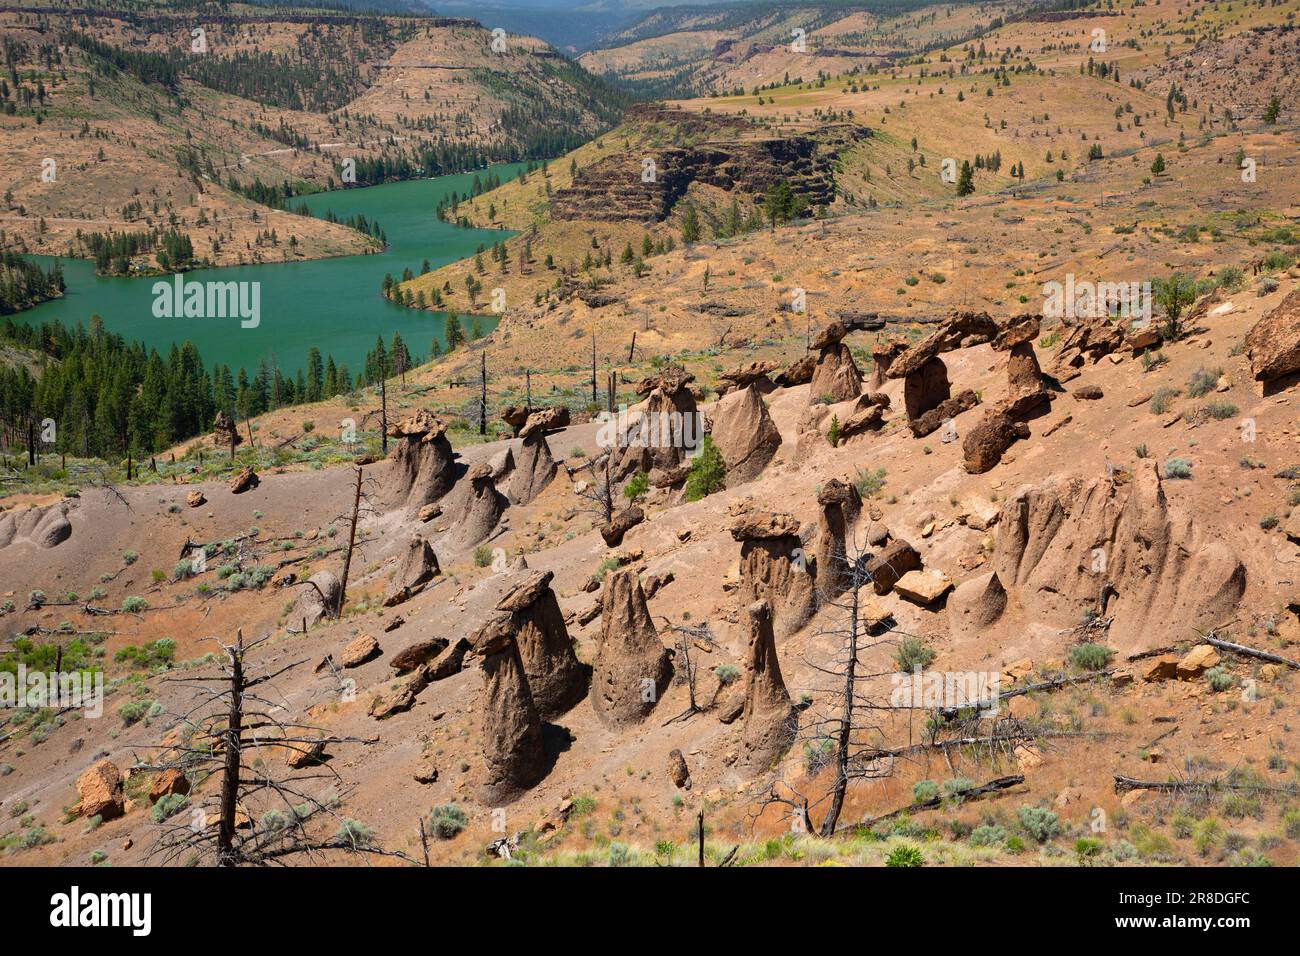 Balancing Rocks con il lago Billy Chinook, Deschutes National Forest, Oregon Foto Stock